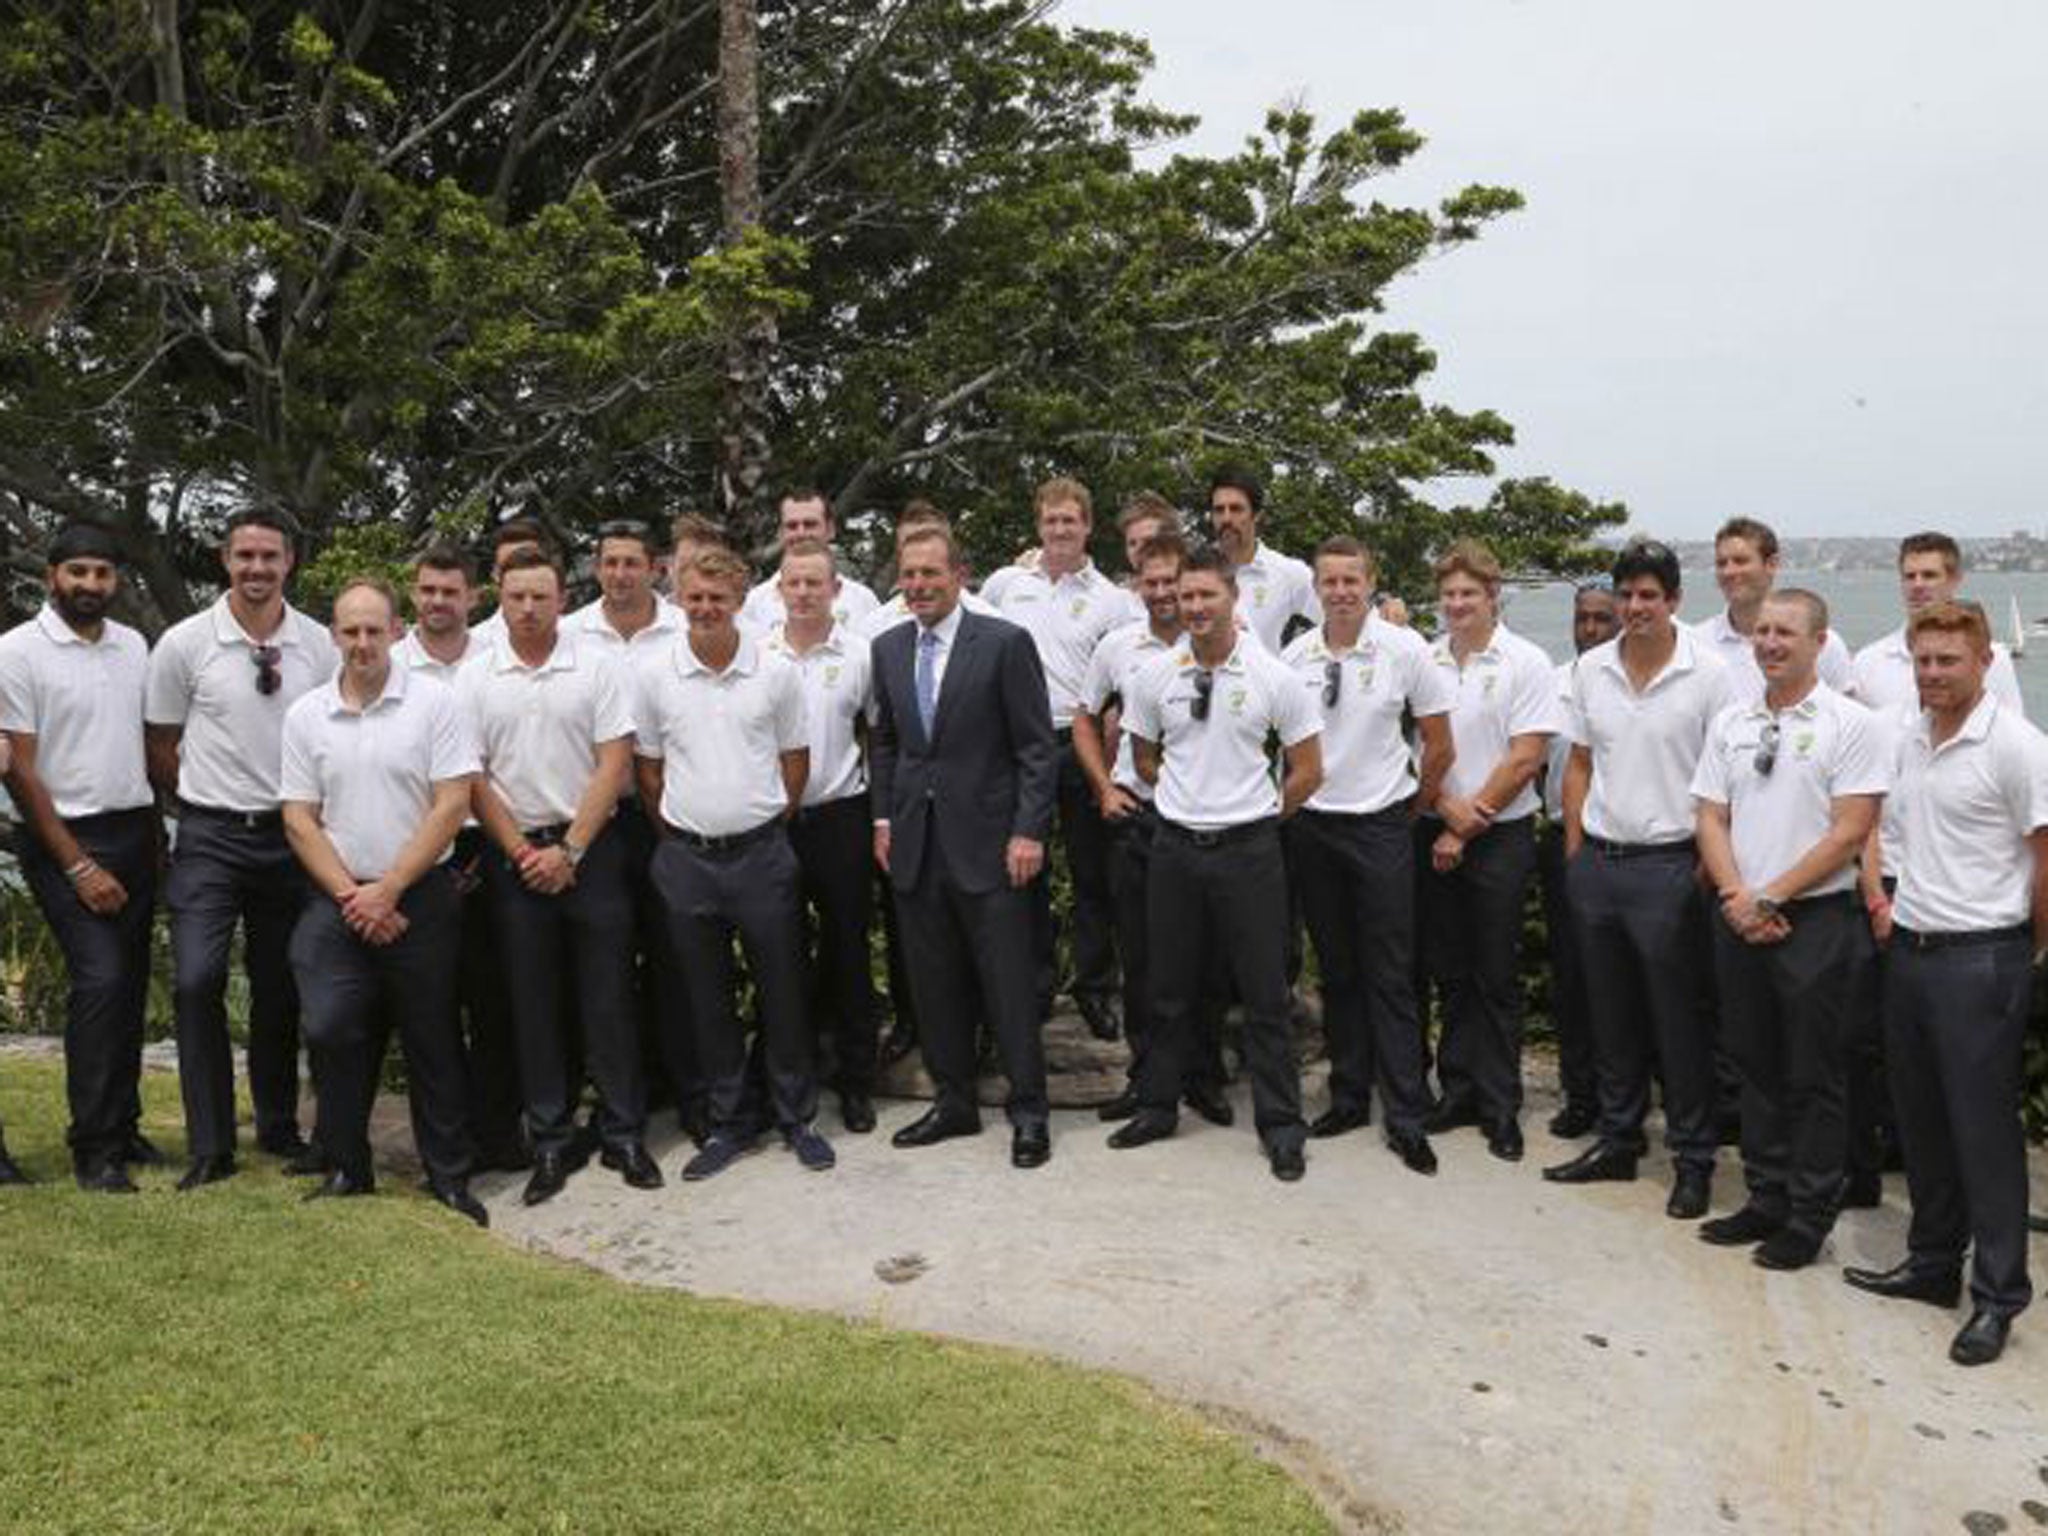 England and Australia players line up with the prime minister of Australia, Tony Abbott, at a New Year’s Day reception at Kirribilli House in Sydney